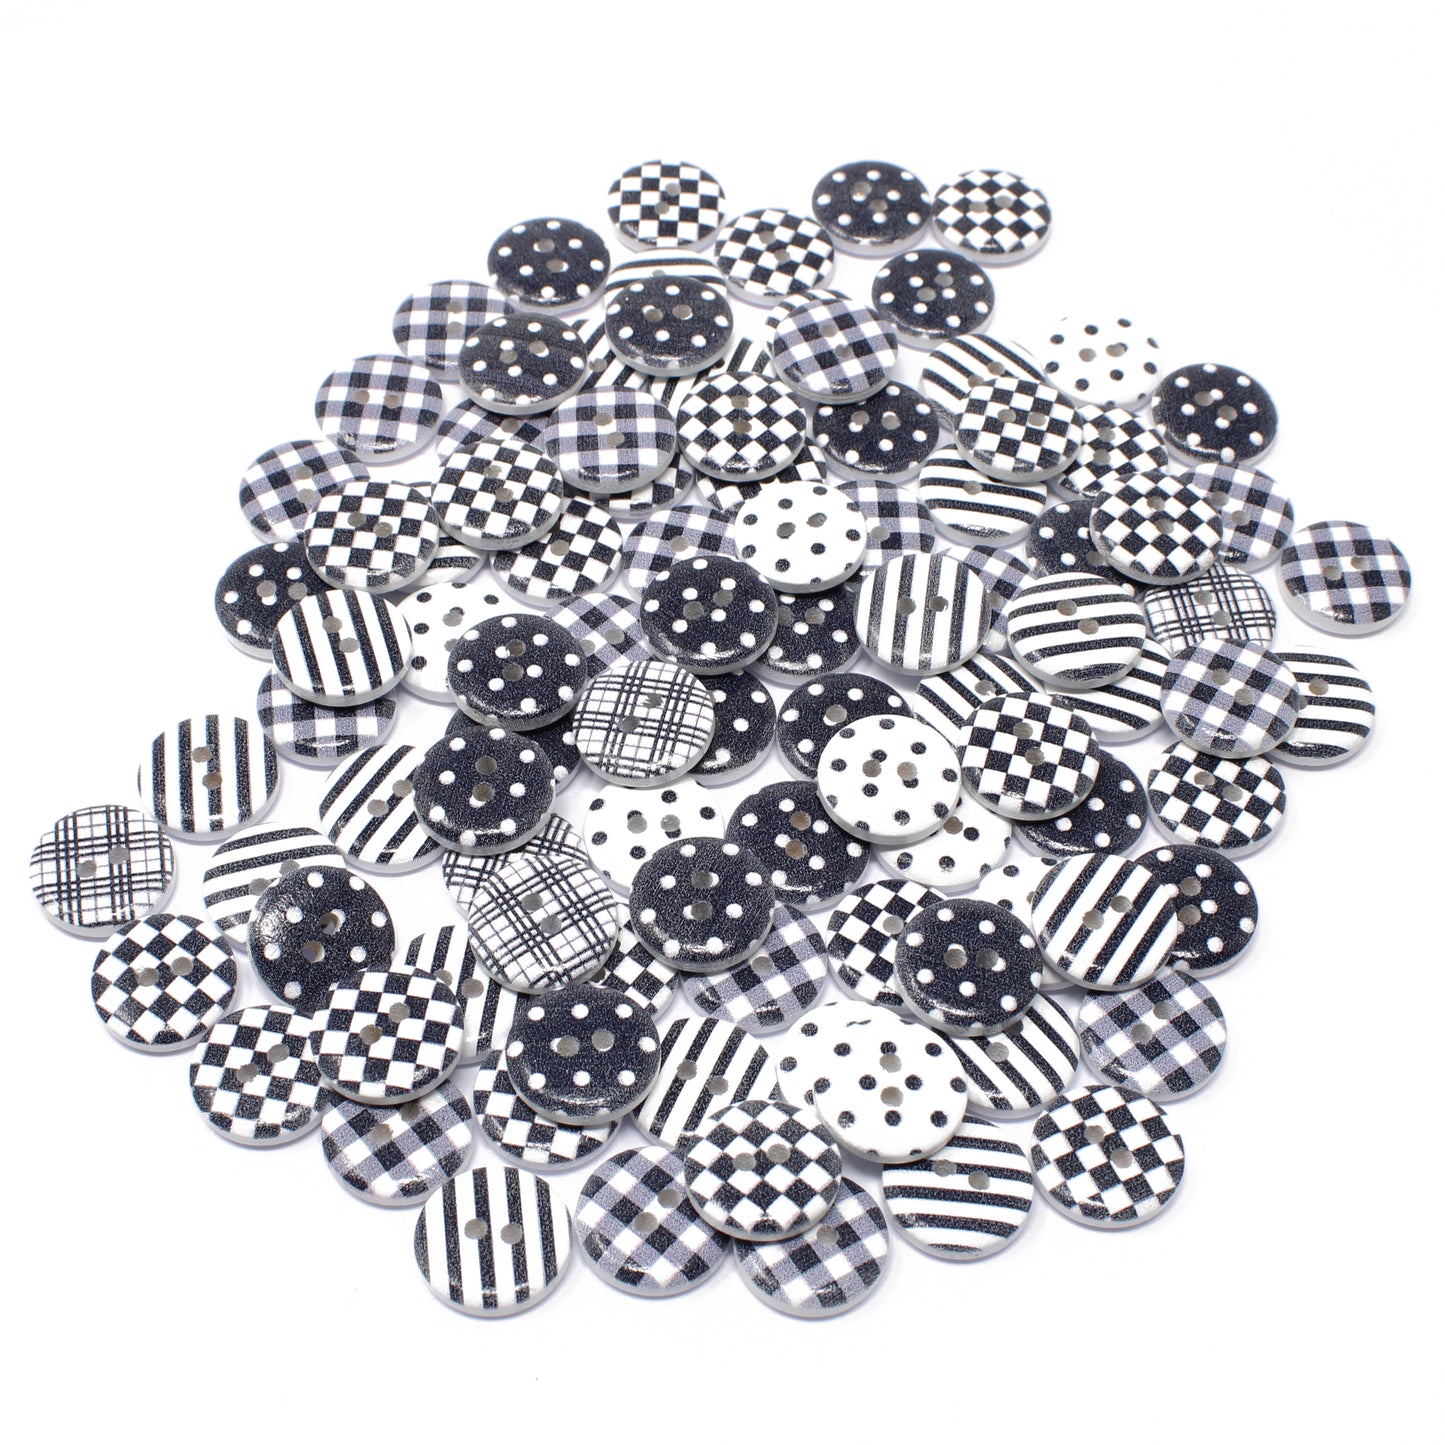 Black & White 100 Mixed 15mm Round Wooden Craft Buttons